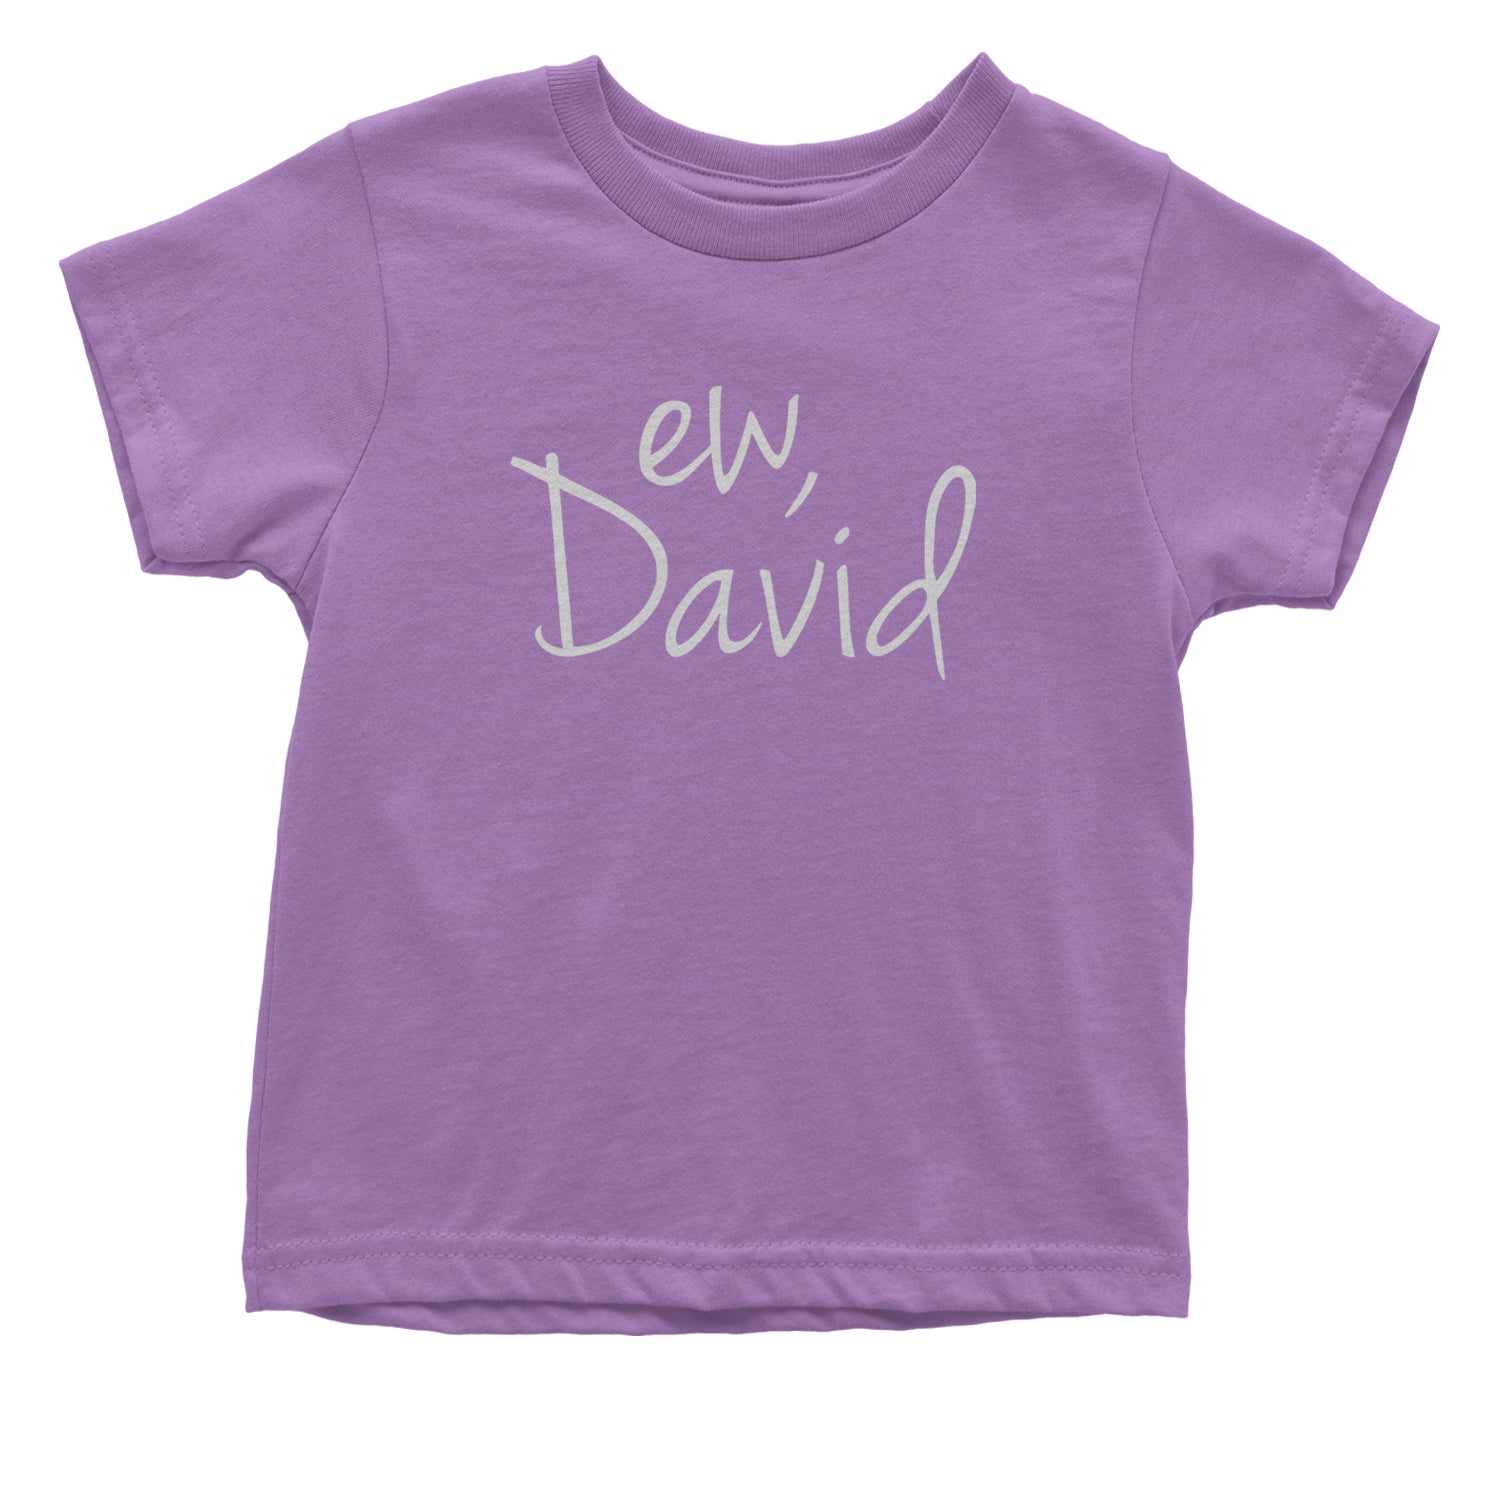 Ew, David Funny Creek TV Show Infant One-Piece Romper Bodysuit and Toddler T-shirt alexis, bit, david, eugene, levy, little, nonchalance, schitt by Expression Tees